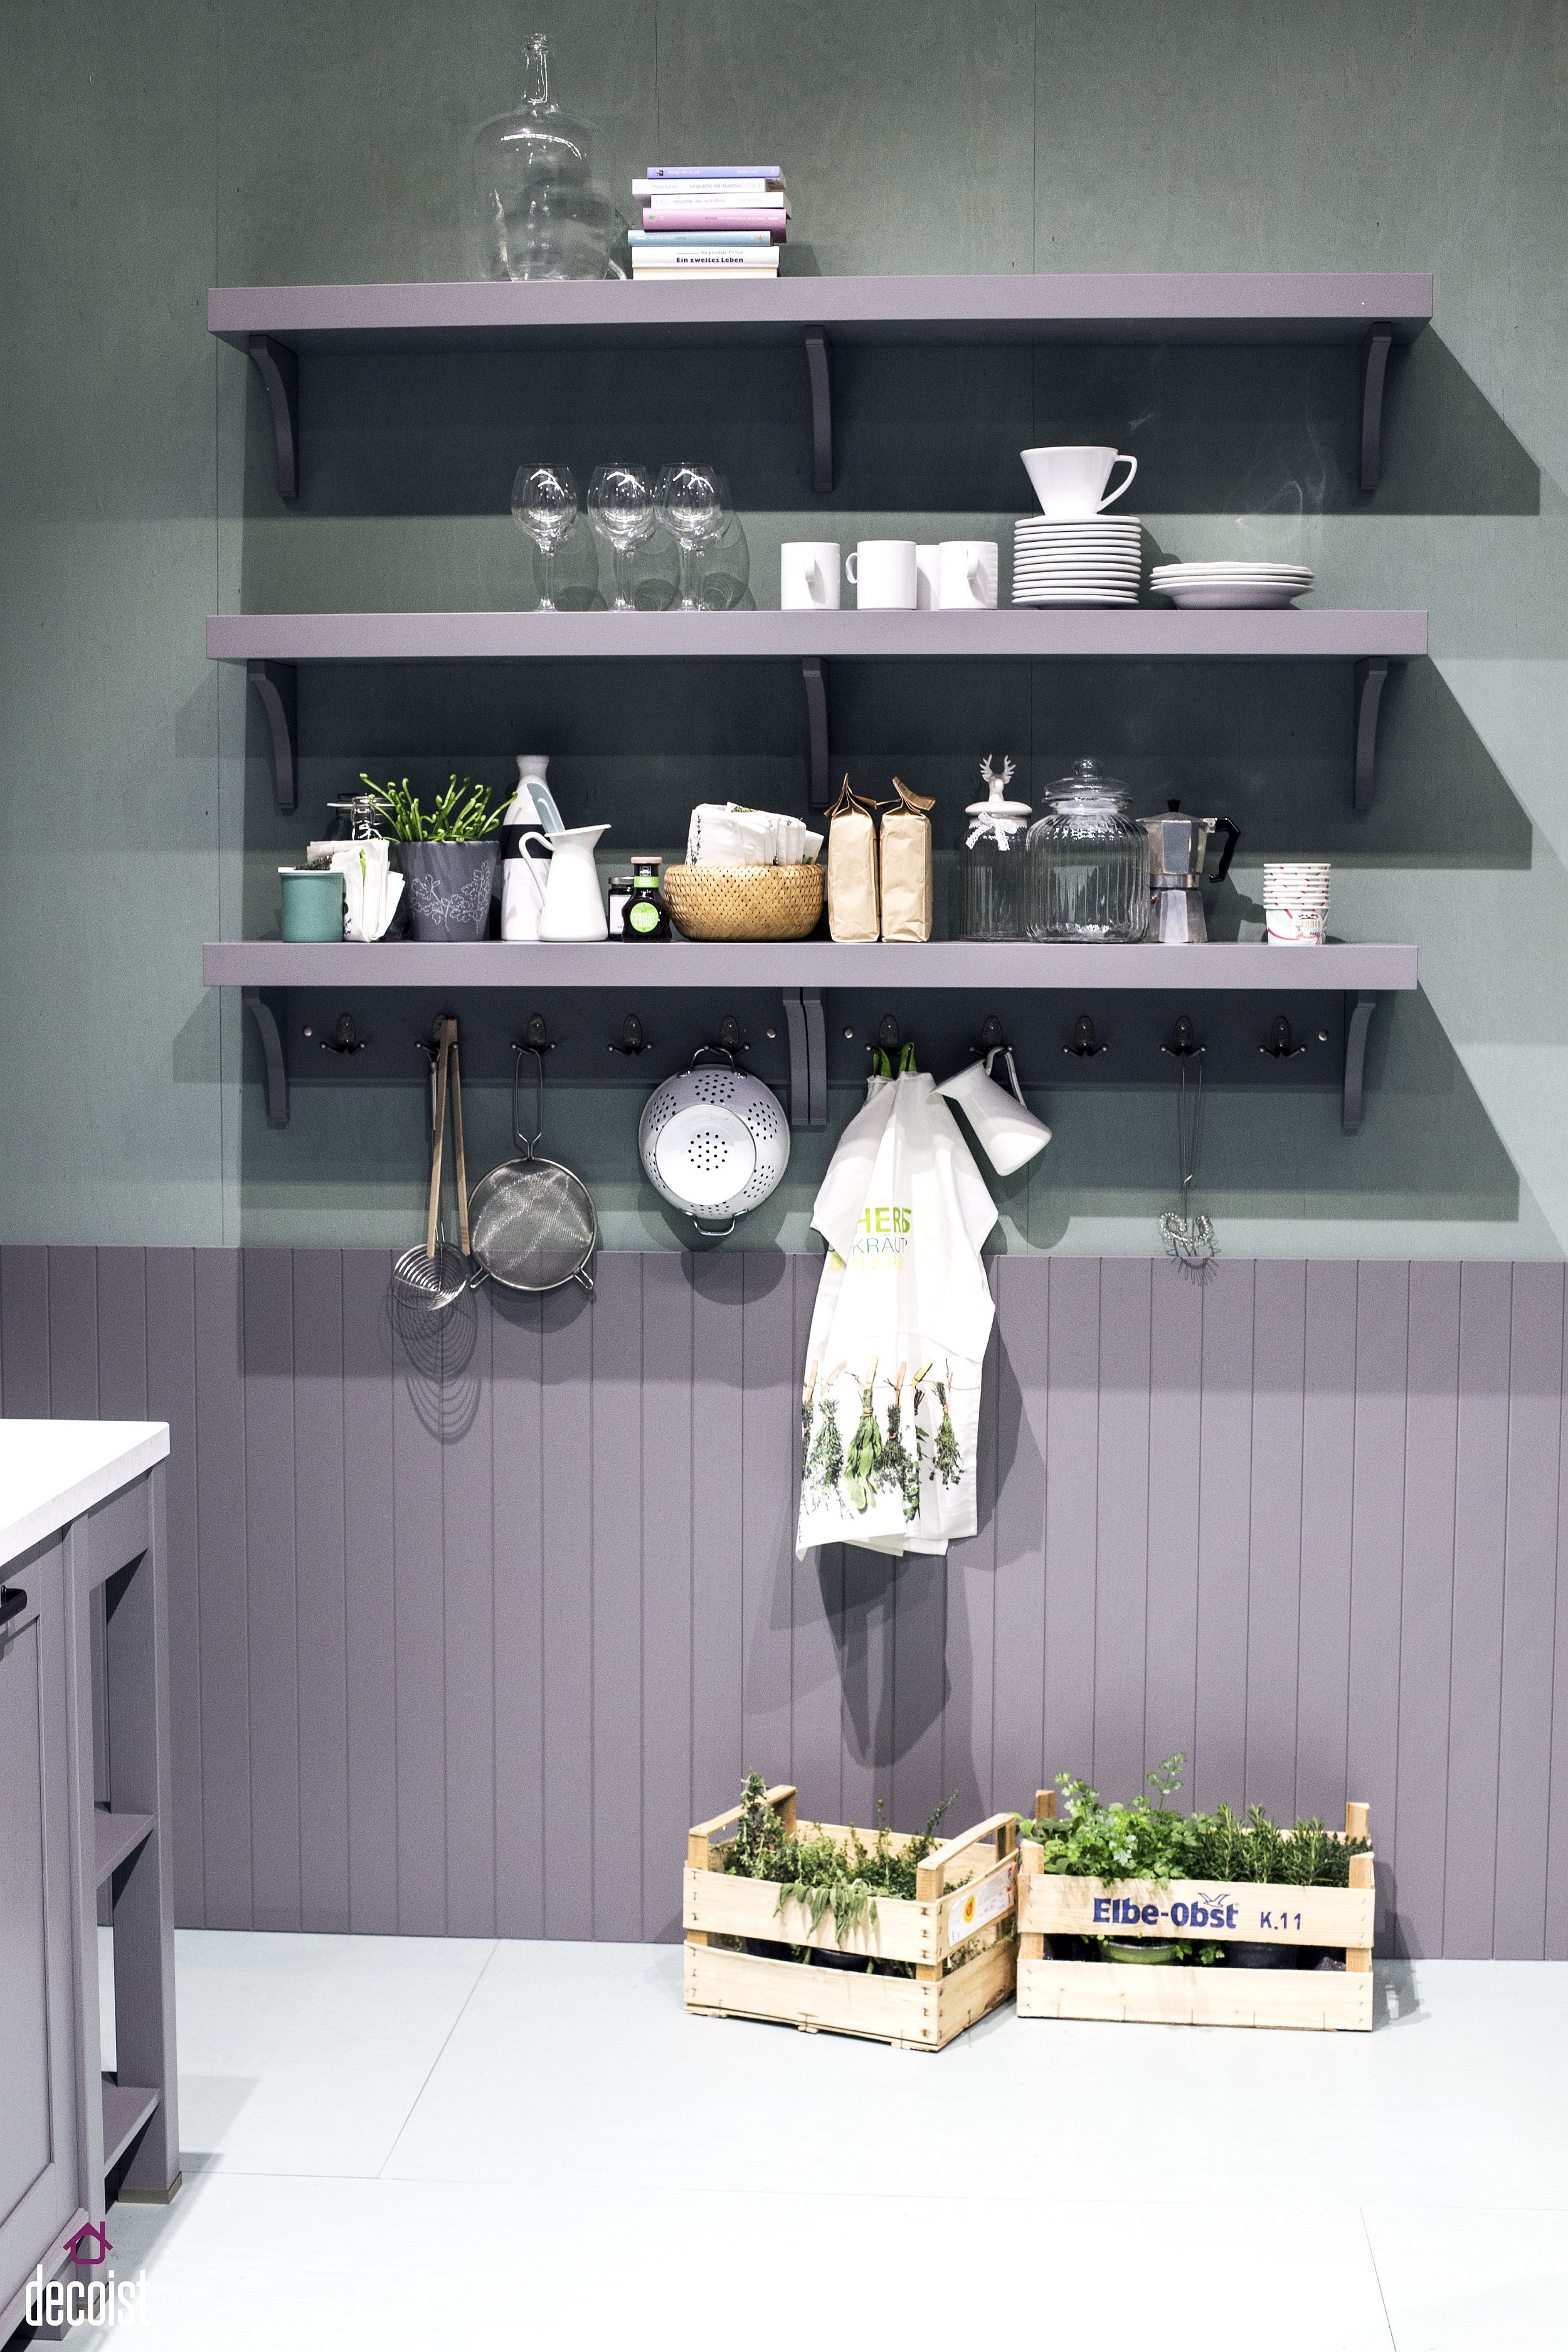 practical and trendy open shelving ideas for the modern kitchen slim floating shelves gray create smart space savvy display pine wall shelf unit decorative items how much weight